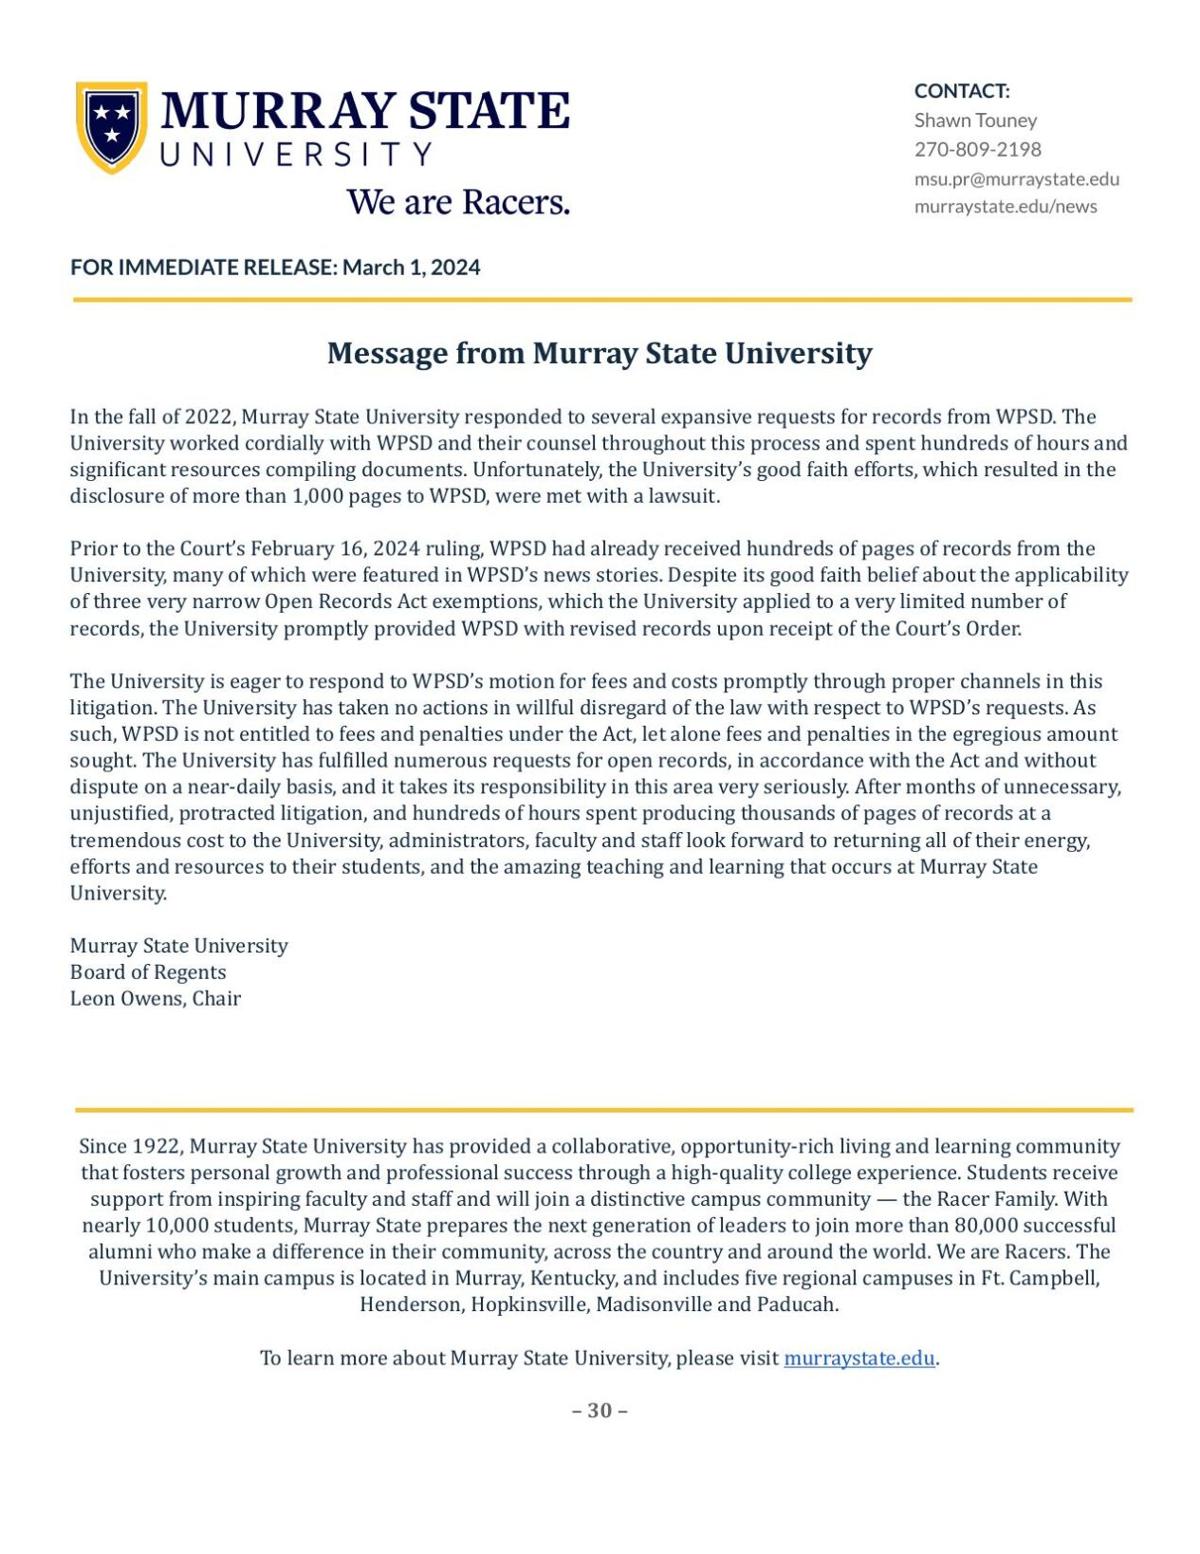 Message from Murray State University